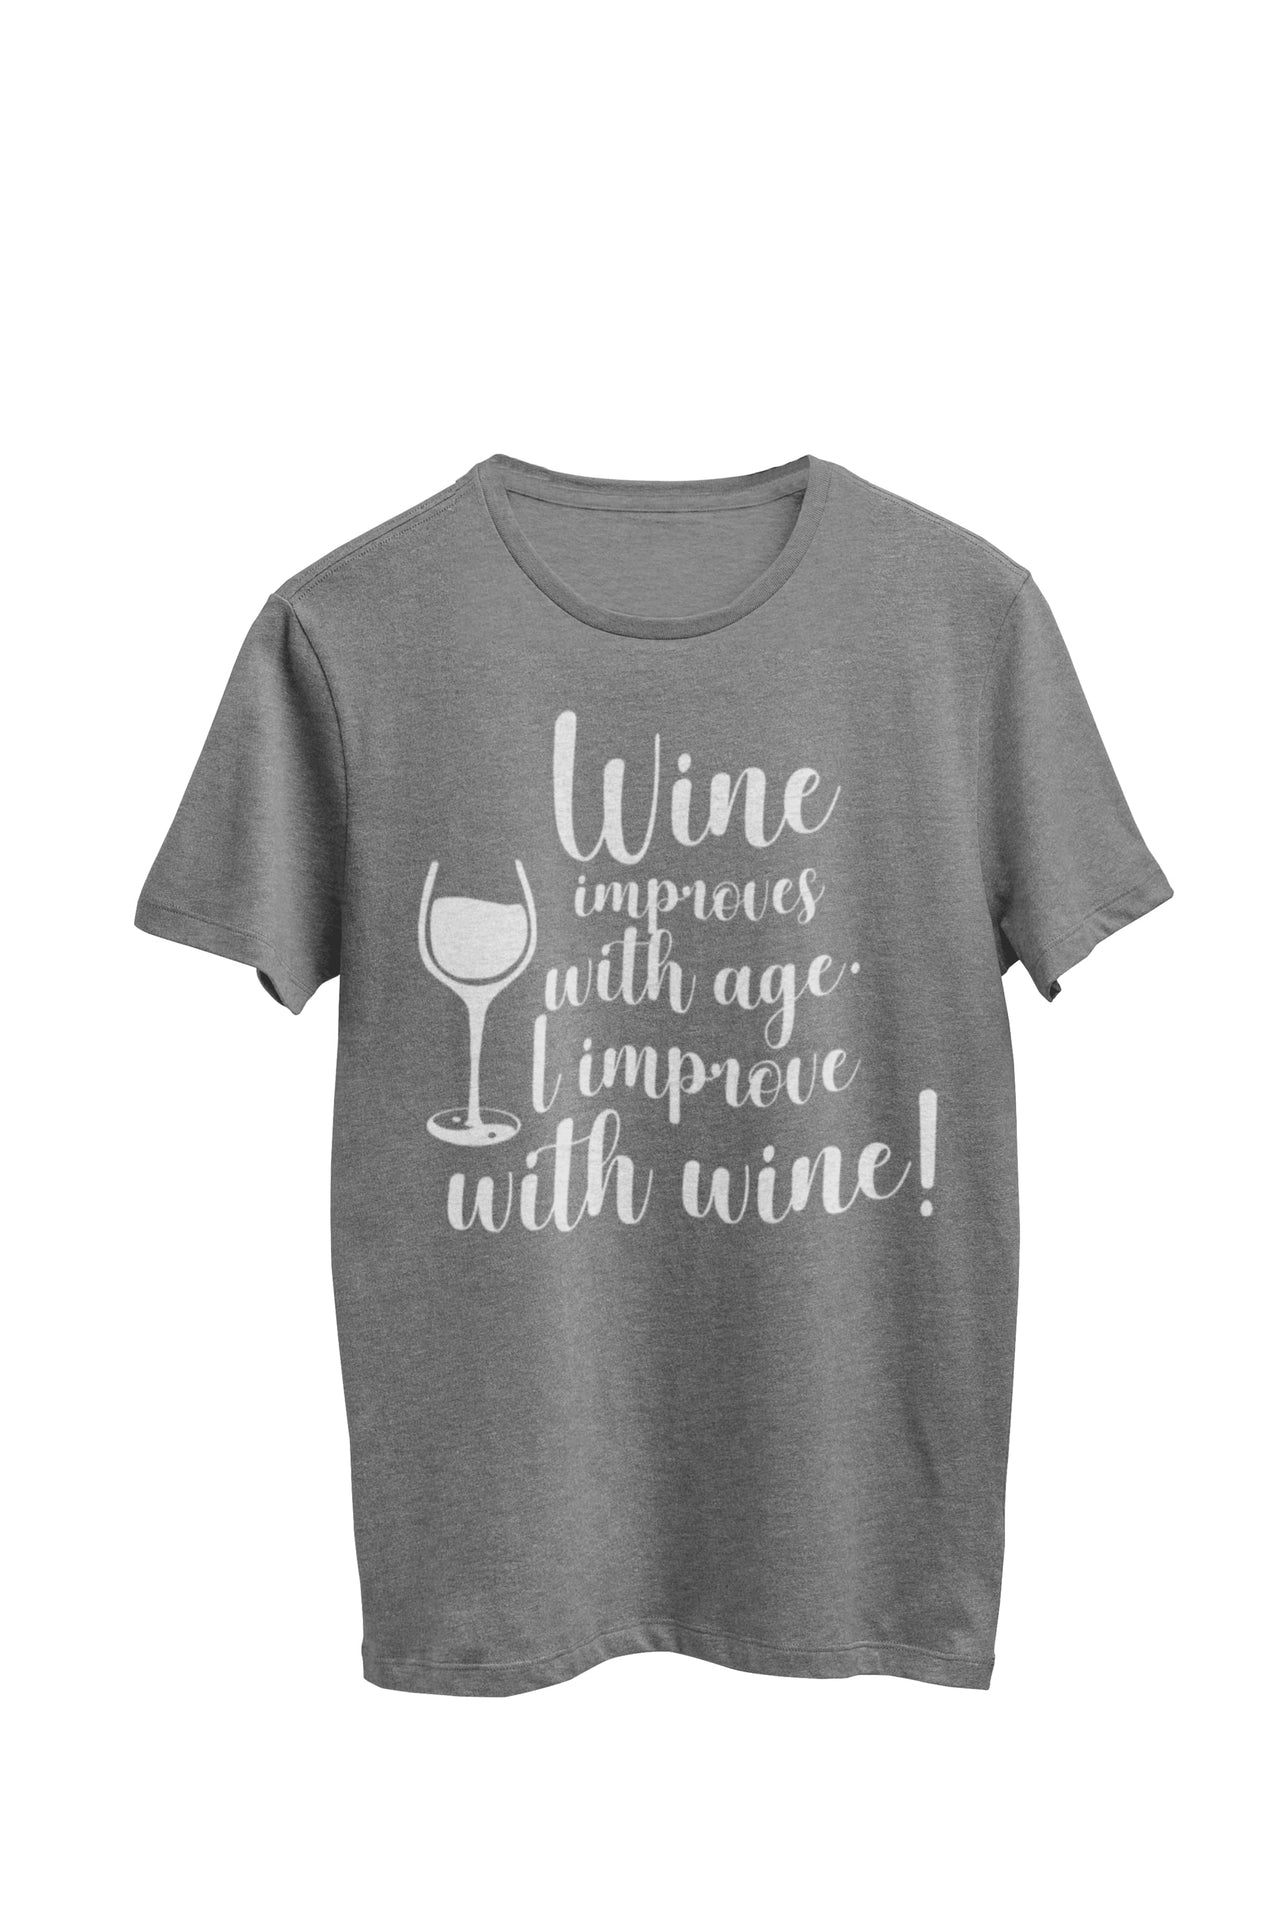 Gray Heather Unisex T-shirt with the text 'Wine improves with age, I improve with wine,' complemented by an image of a wine glass with a yin yang symbol on the stem. Designed by WooHoo Apparel.